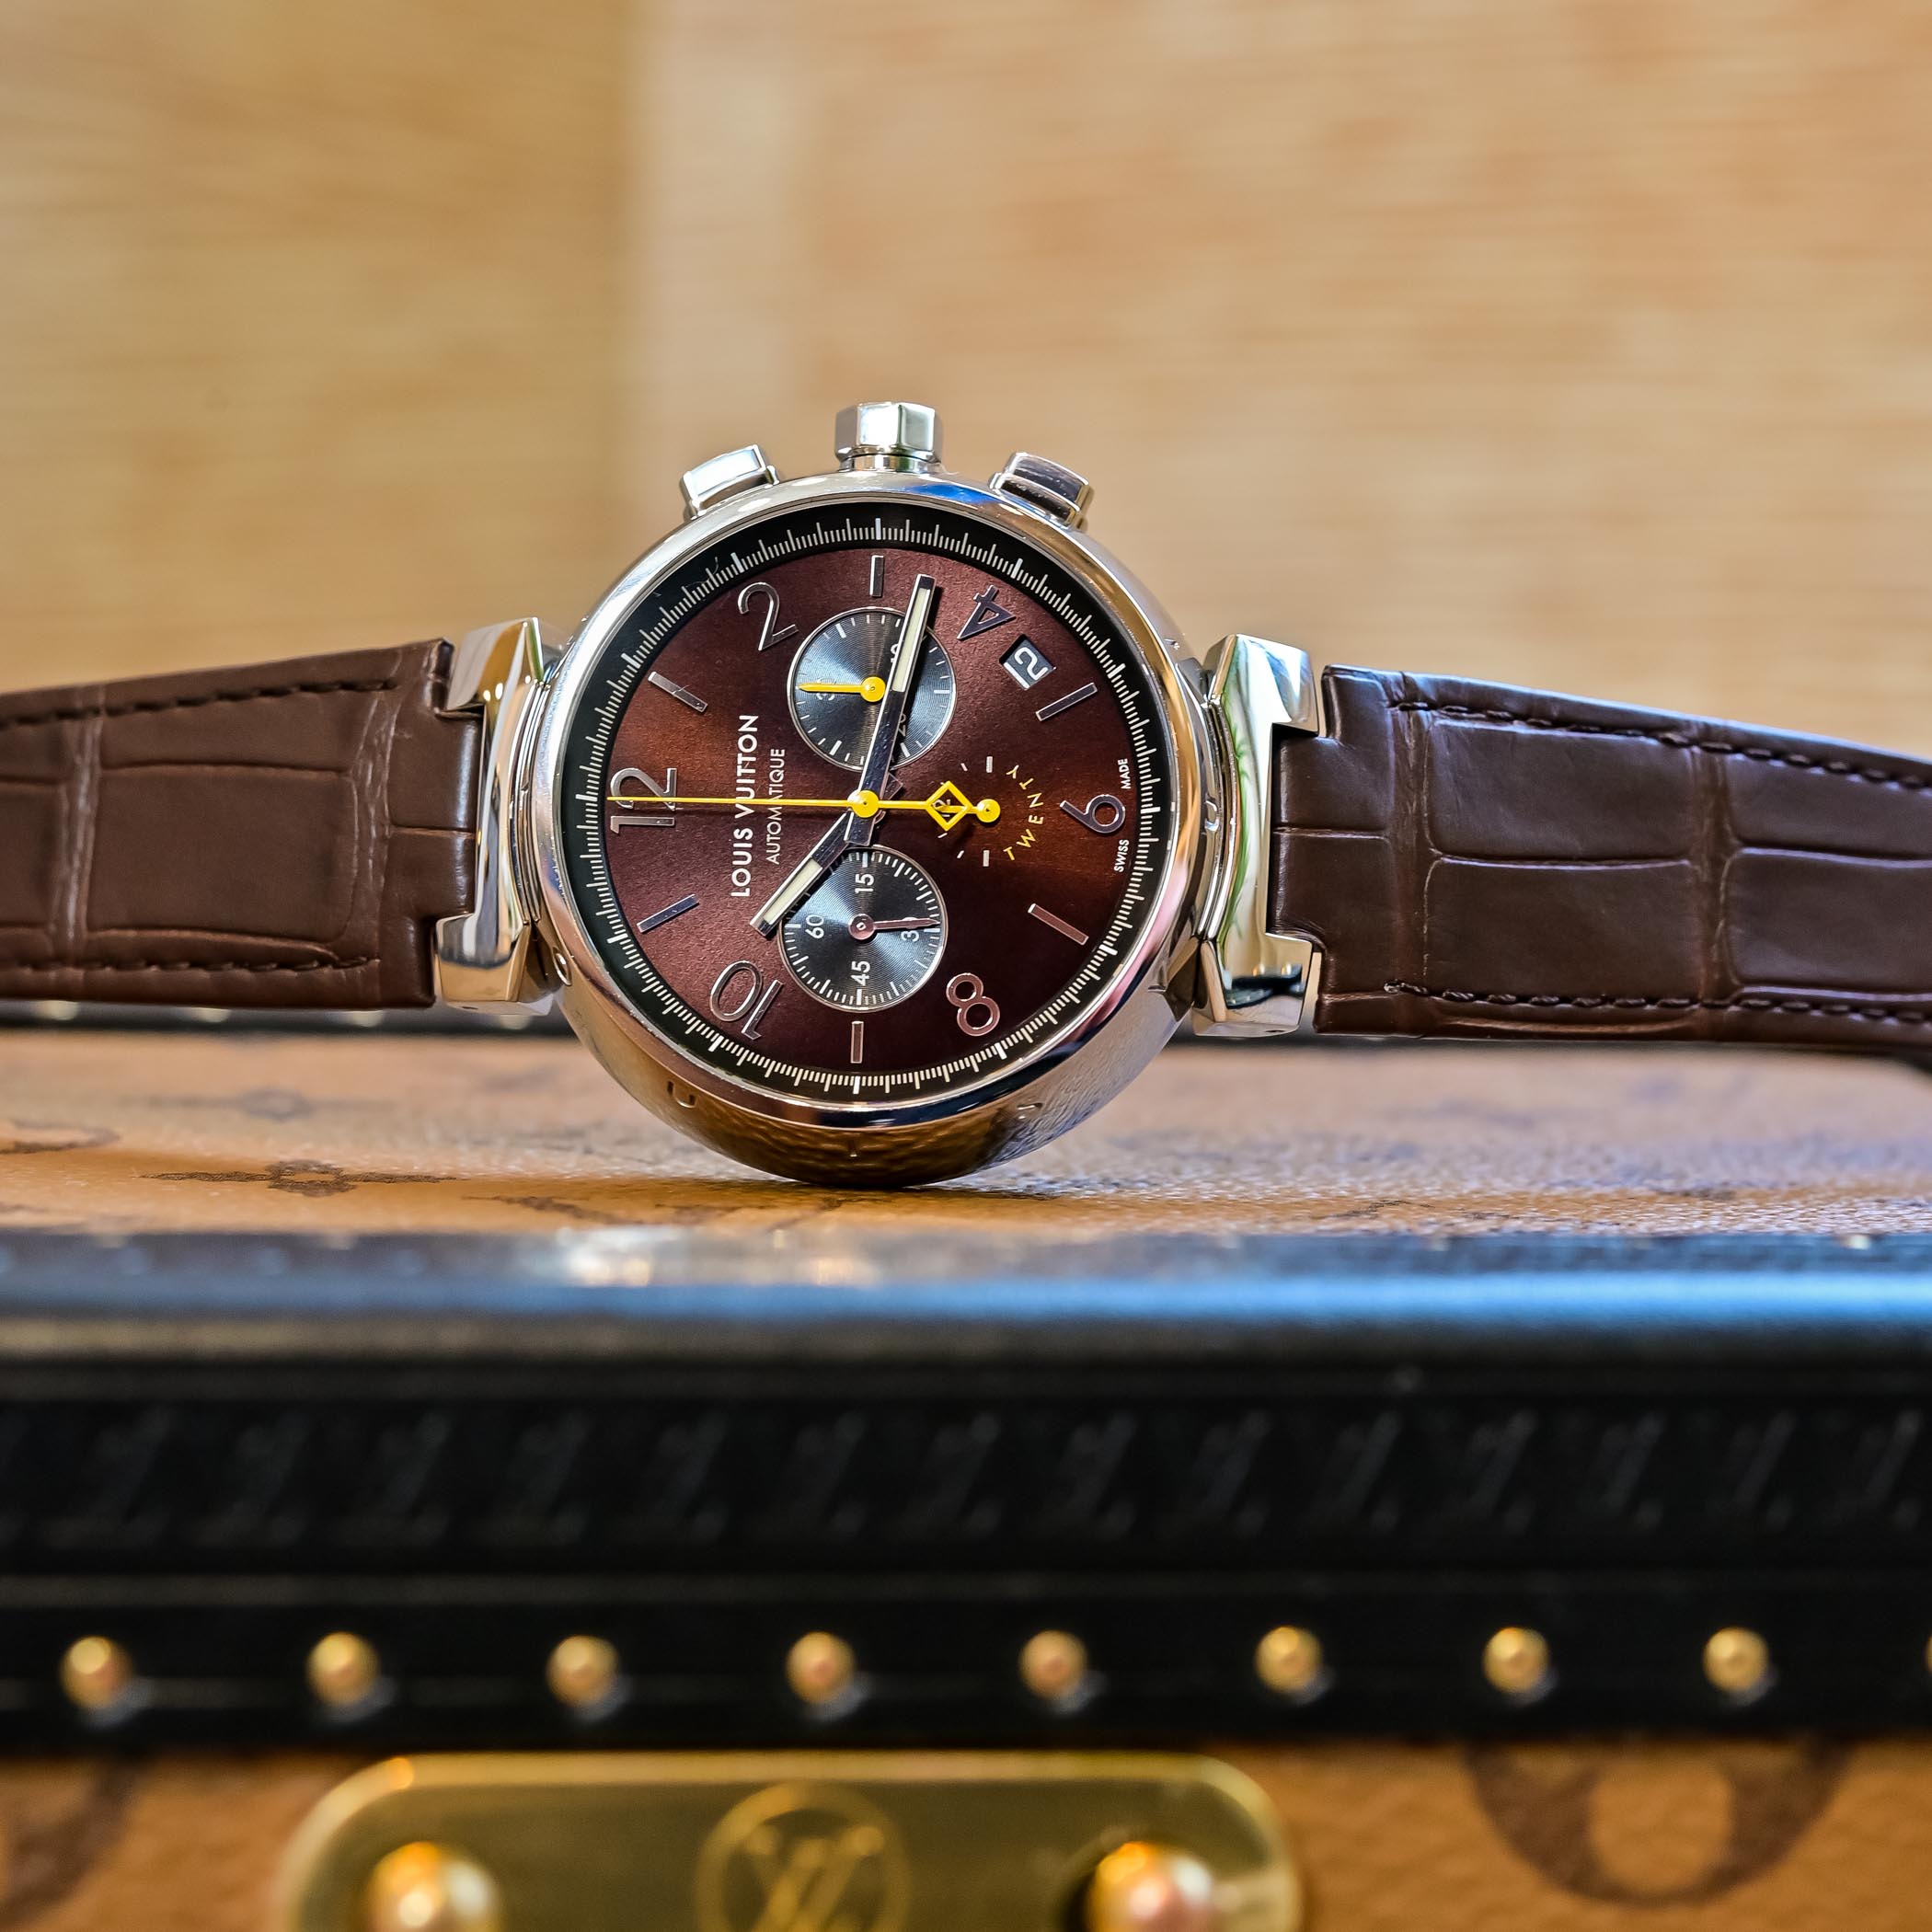 Louis Vuitton Tambour Twenty Limited Edition - Hands-On Review, Price